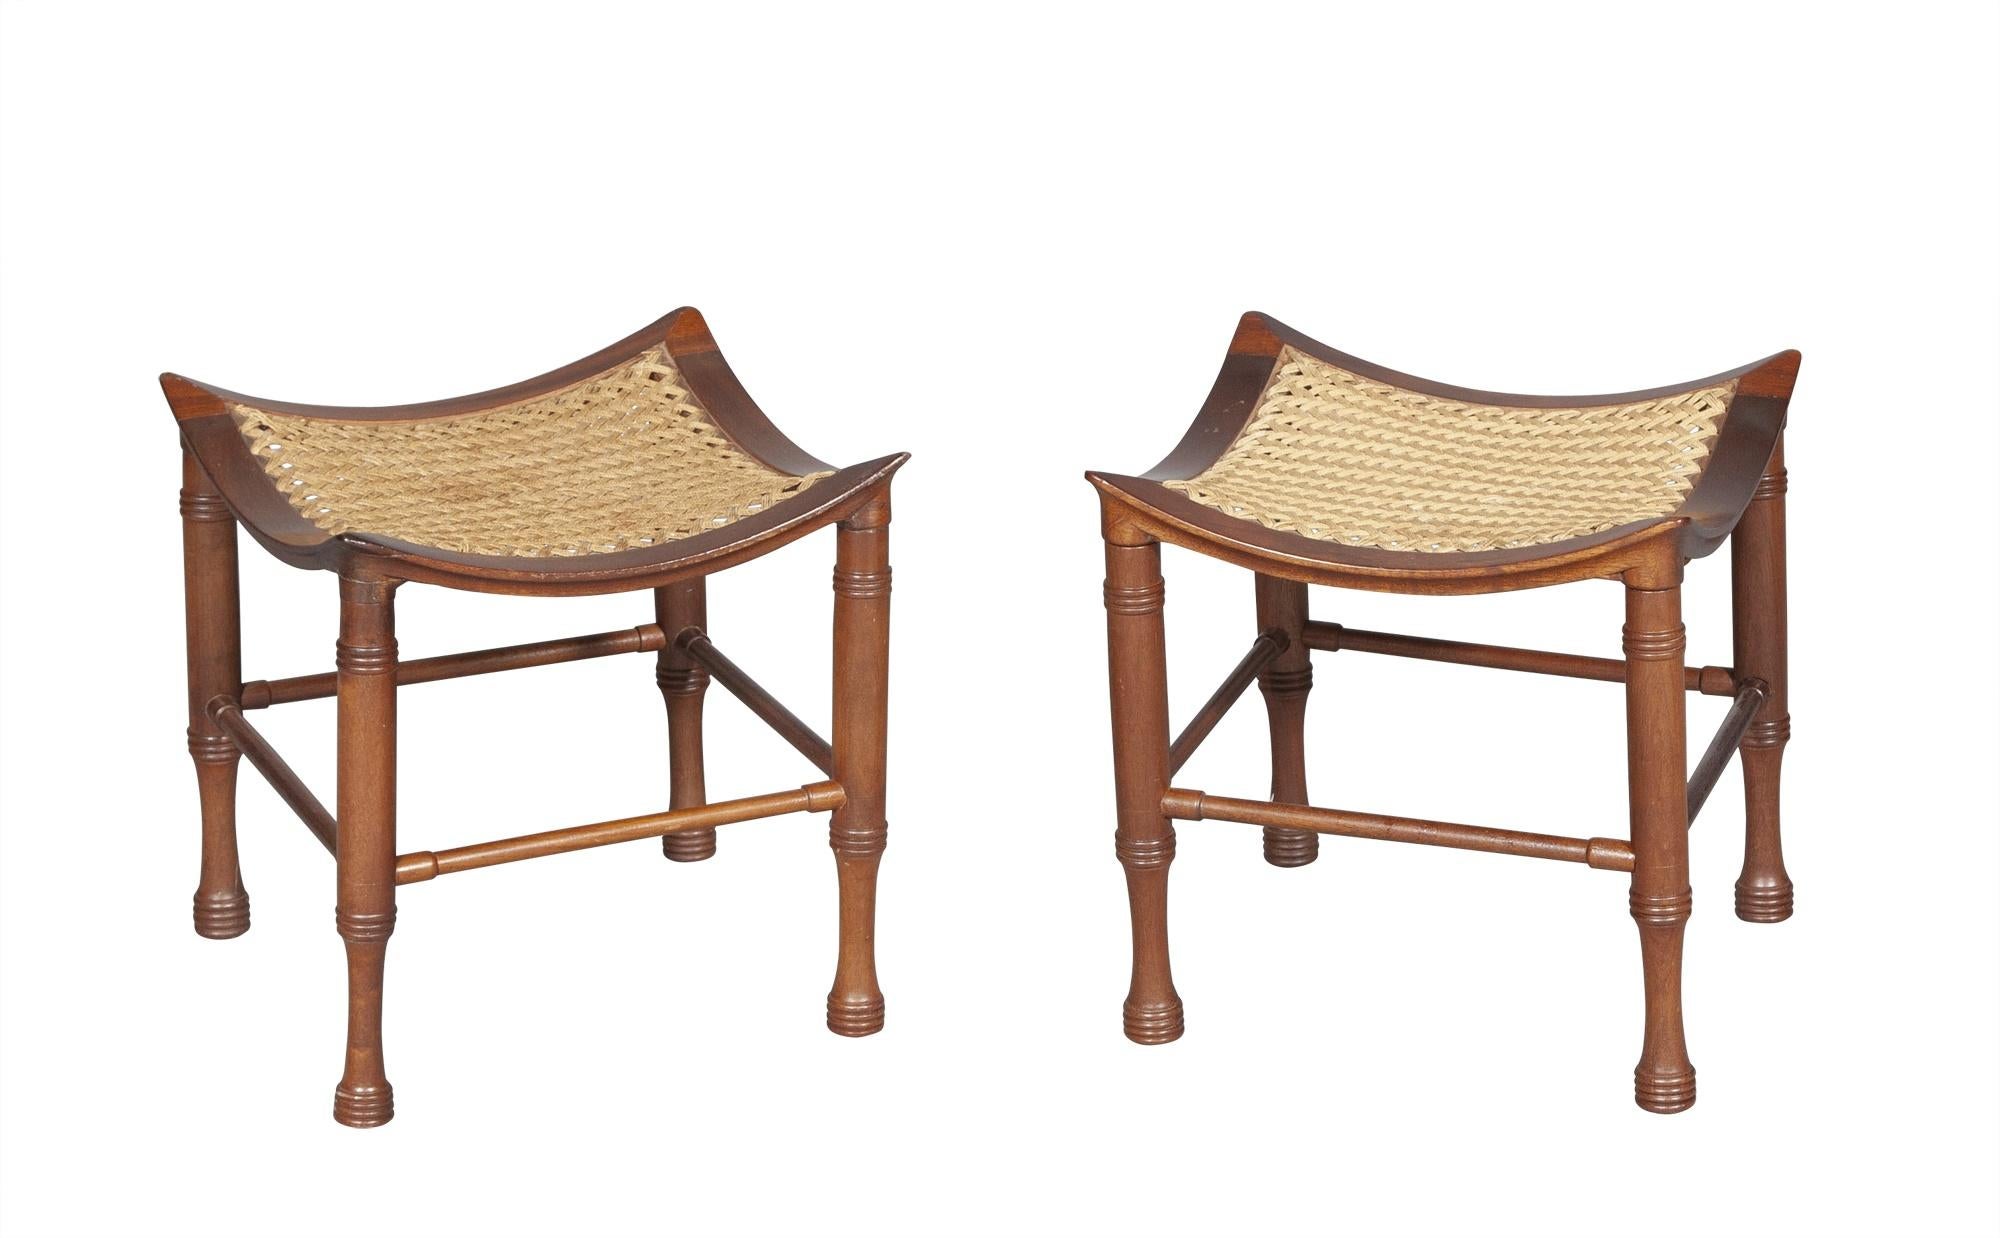 Wicker Bench and Pair of Thebes Stools by Liberty and Co.